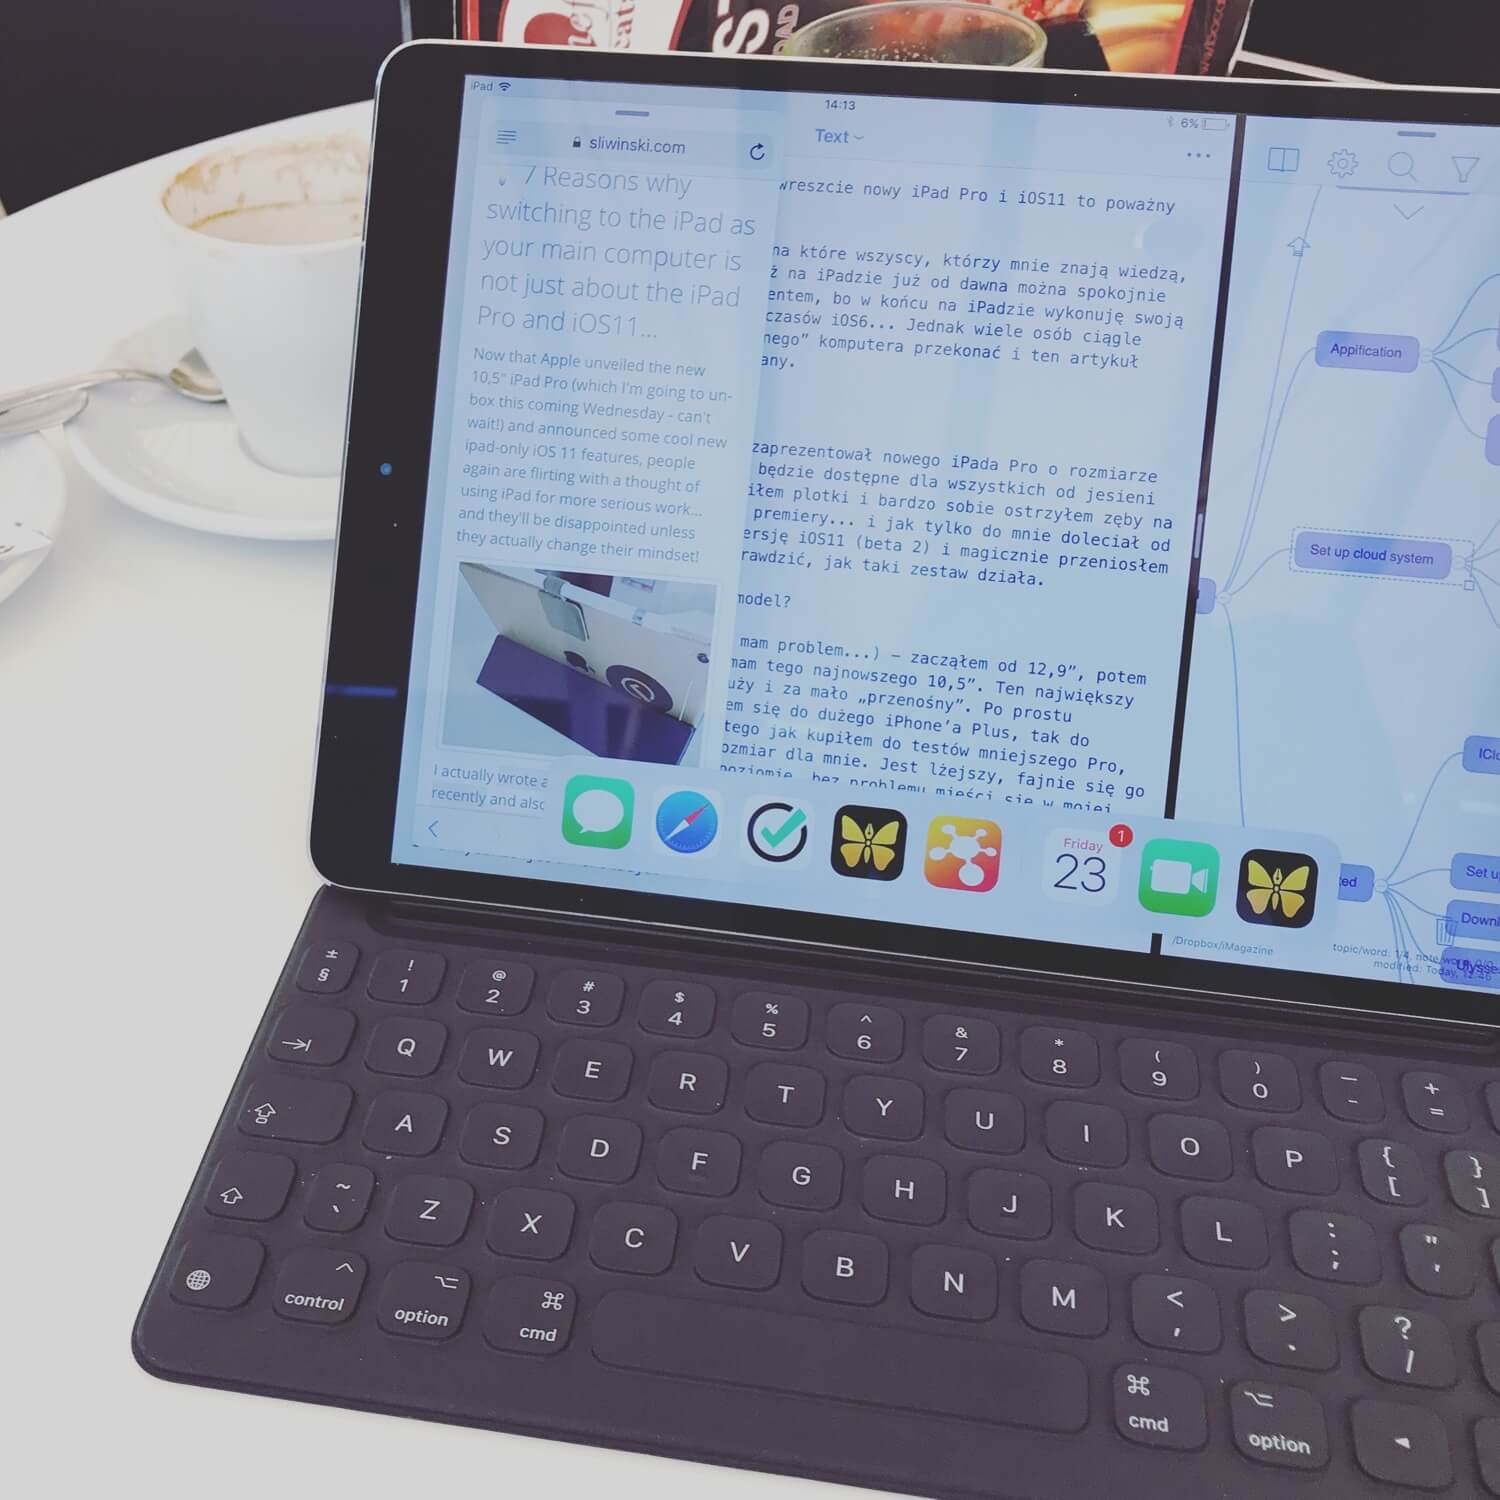 Being #iPadOnly on 10.5” – is the new iPad Pro with iOS11 finally a serious setup for work?